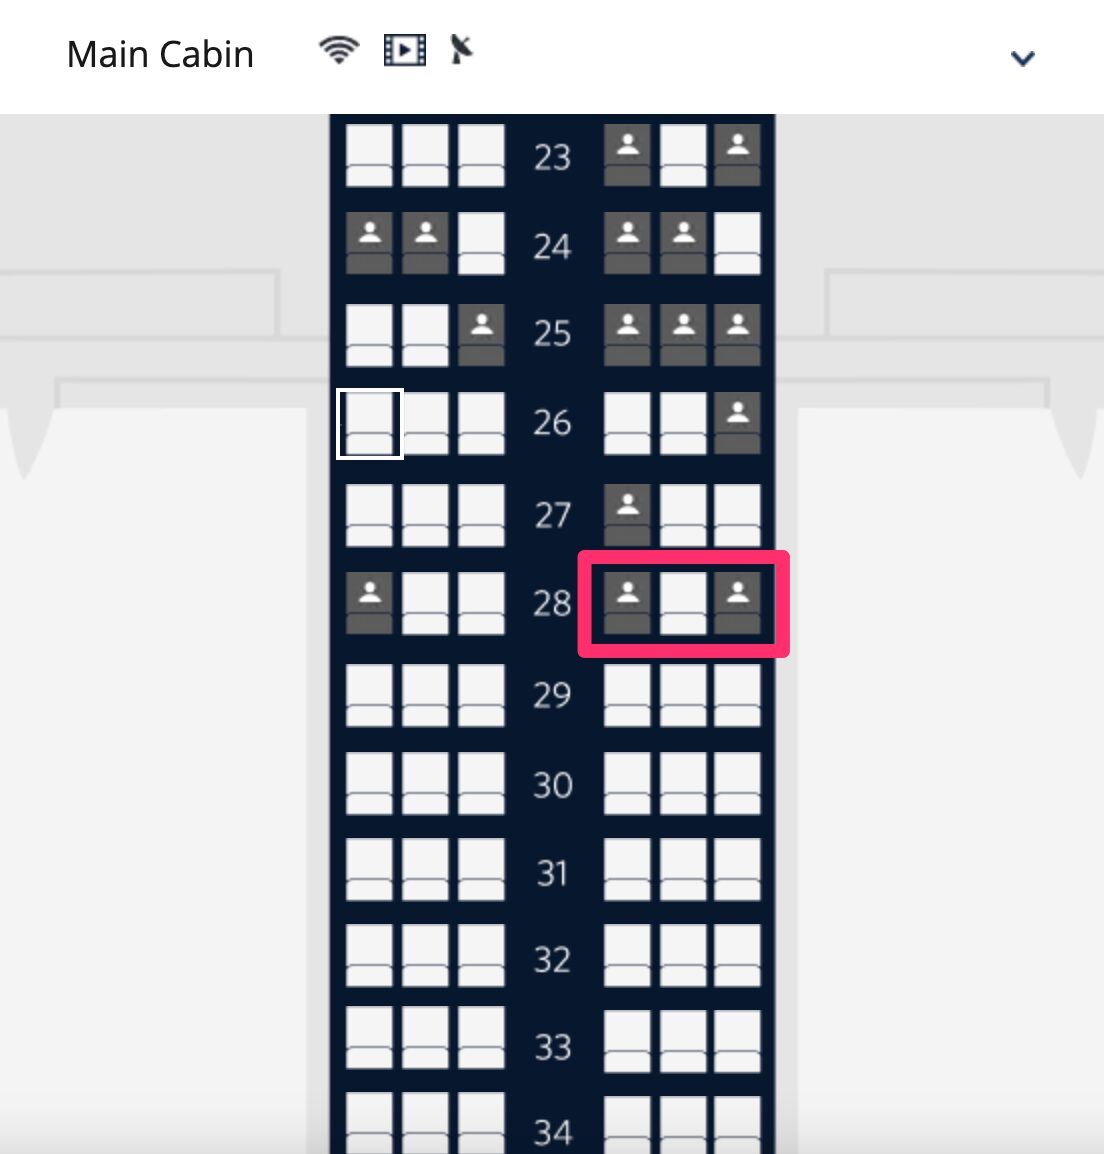 Delta Air Lines seat selection seat map